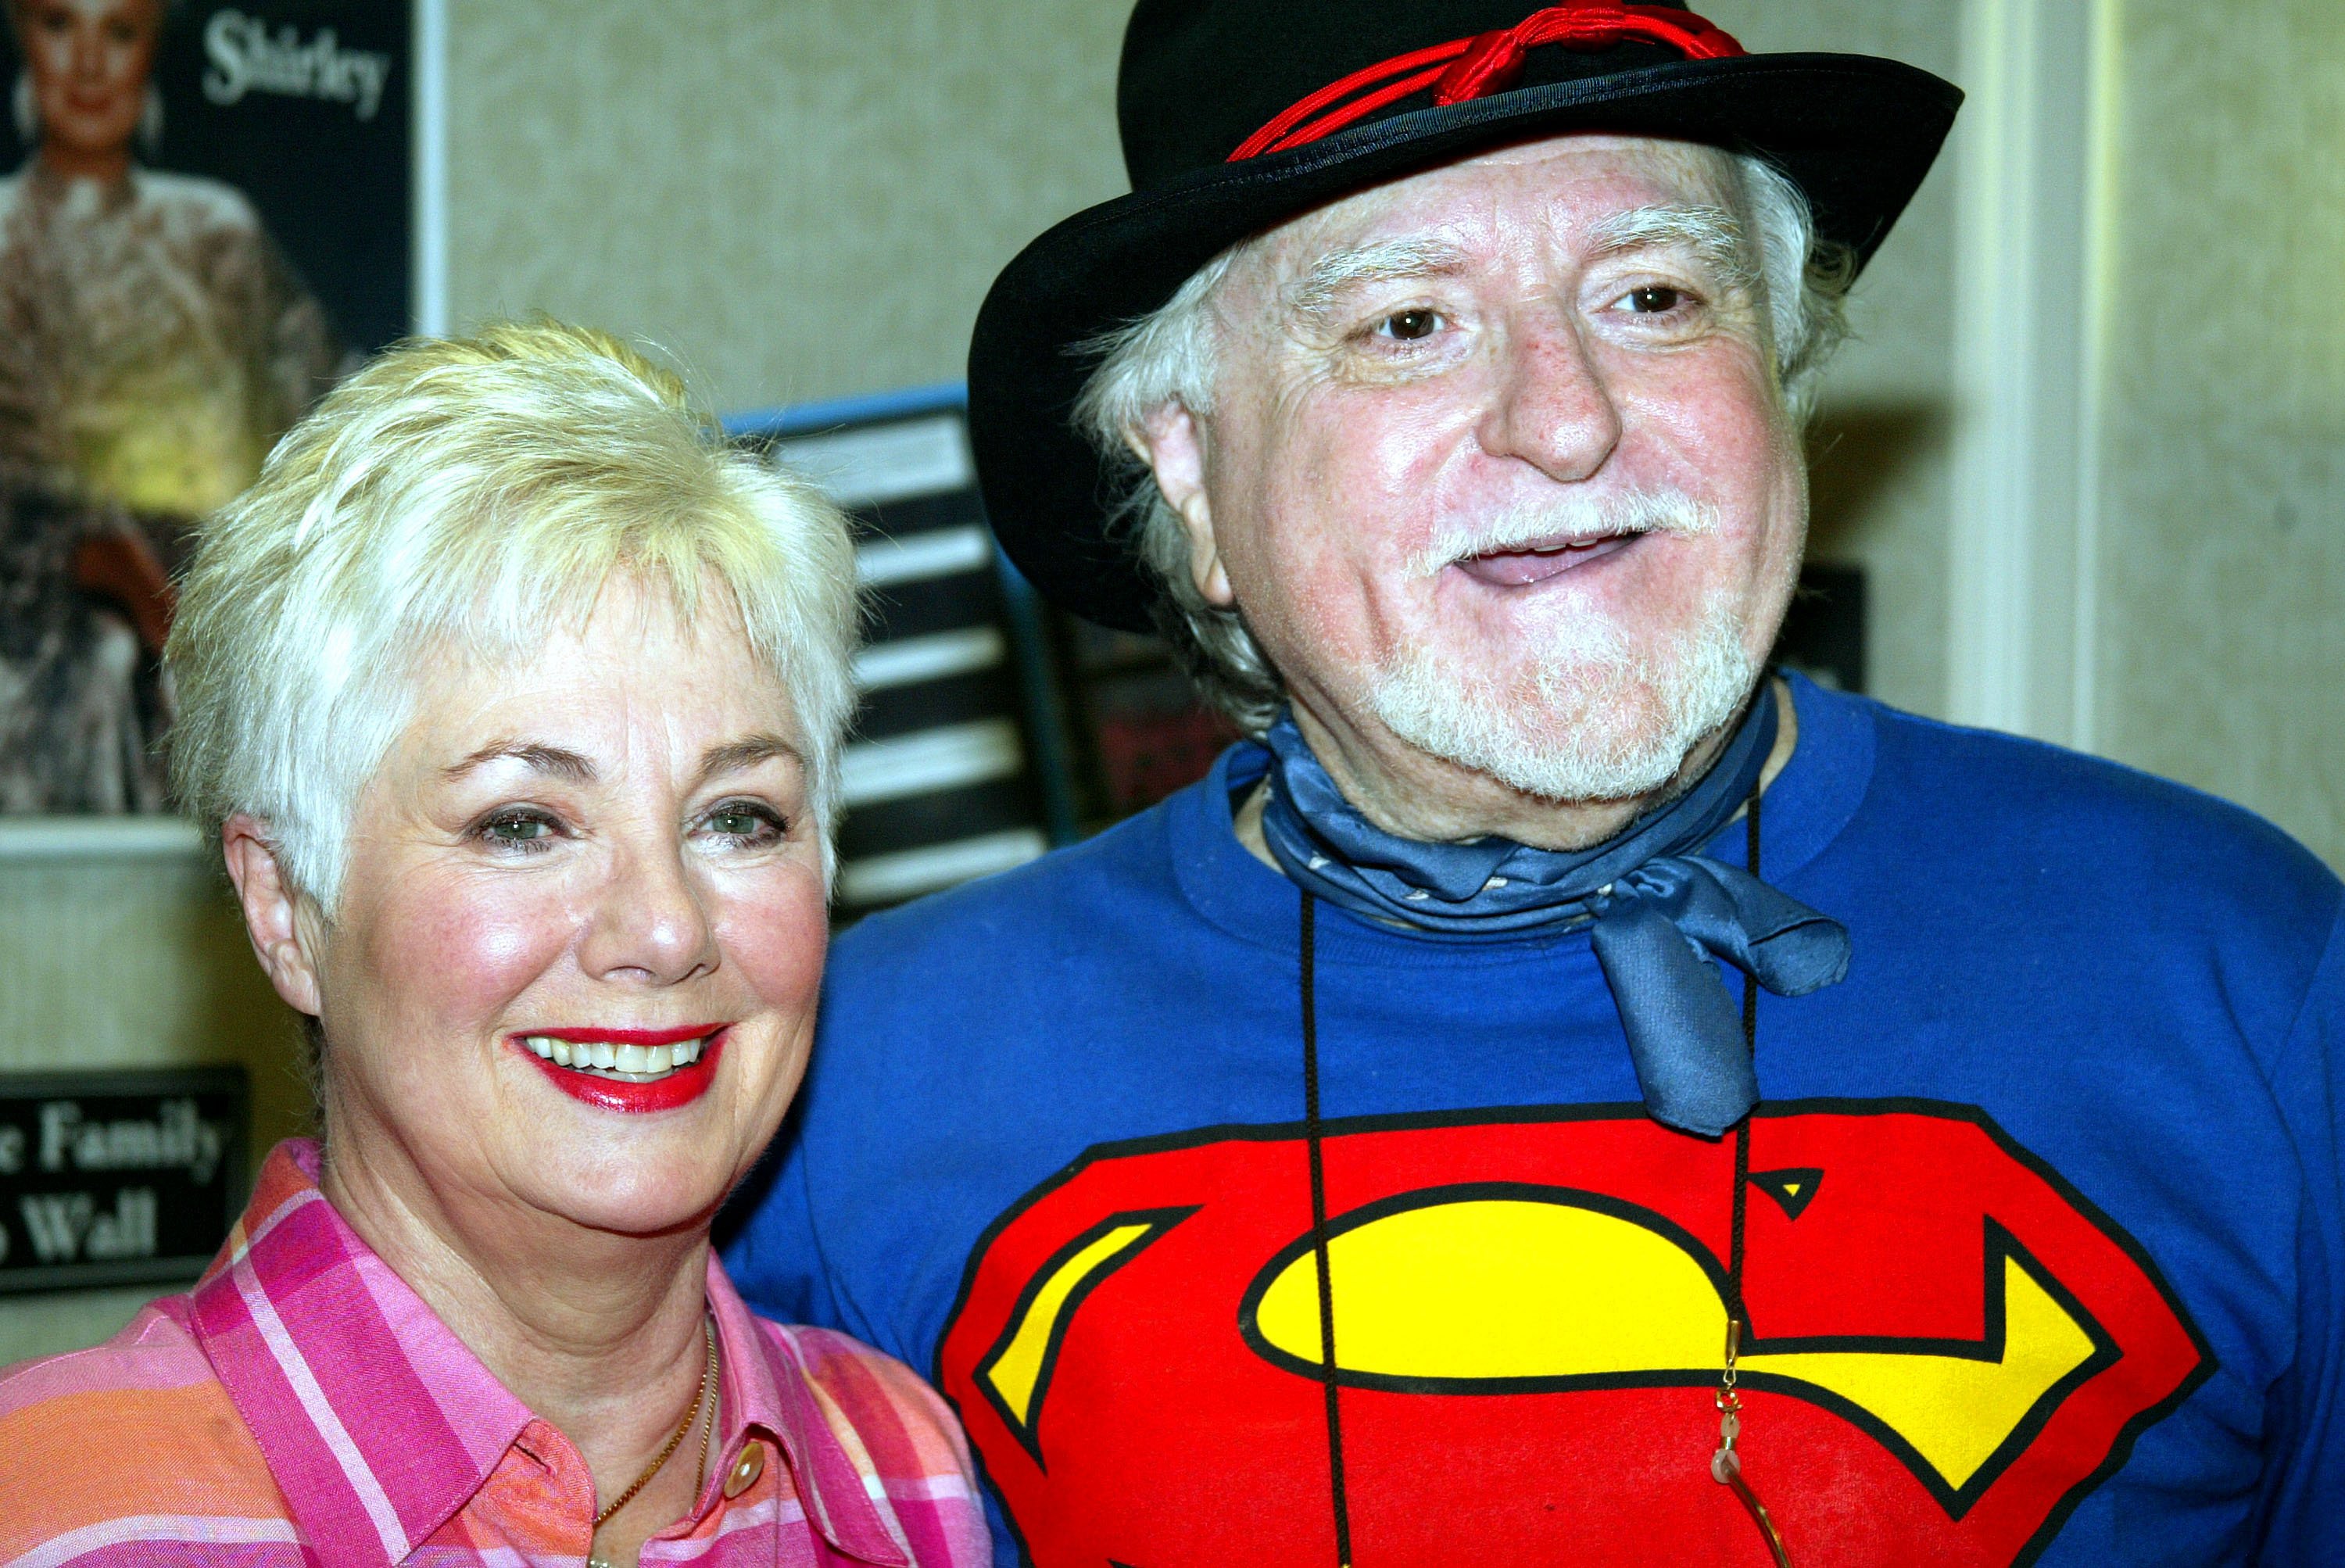 Shirley Jones and Marty Ingels during Hollywood Collectors & Celebrities Show on June 28, 2003, in North Hollywood, California. | Source: Getty Images